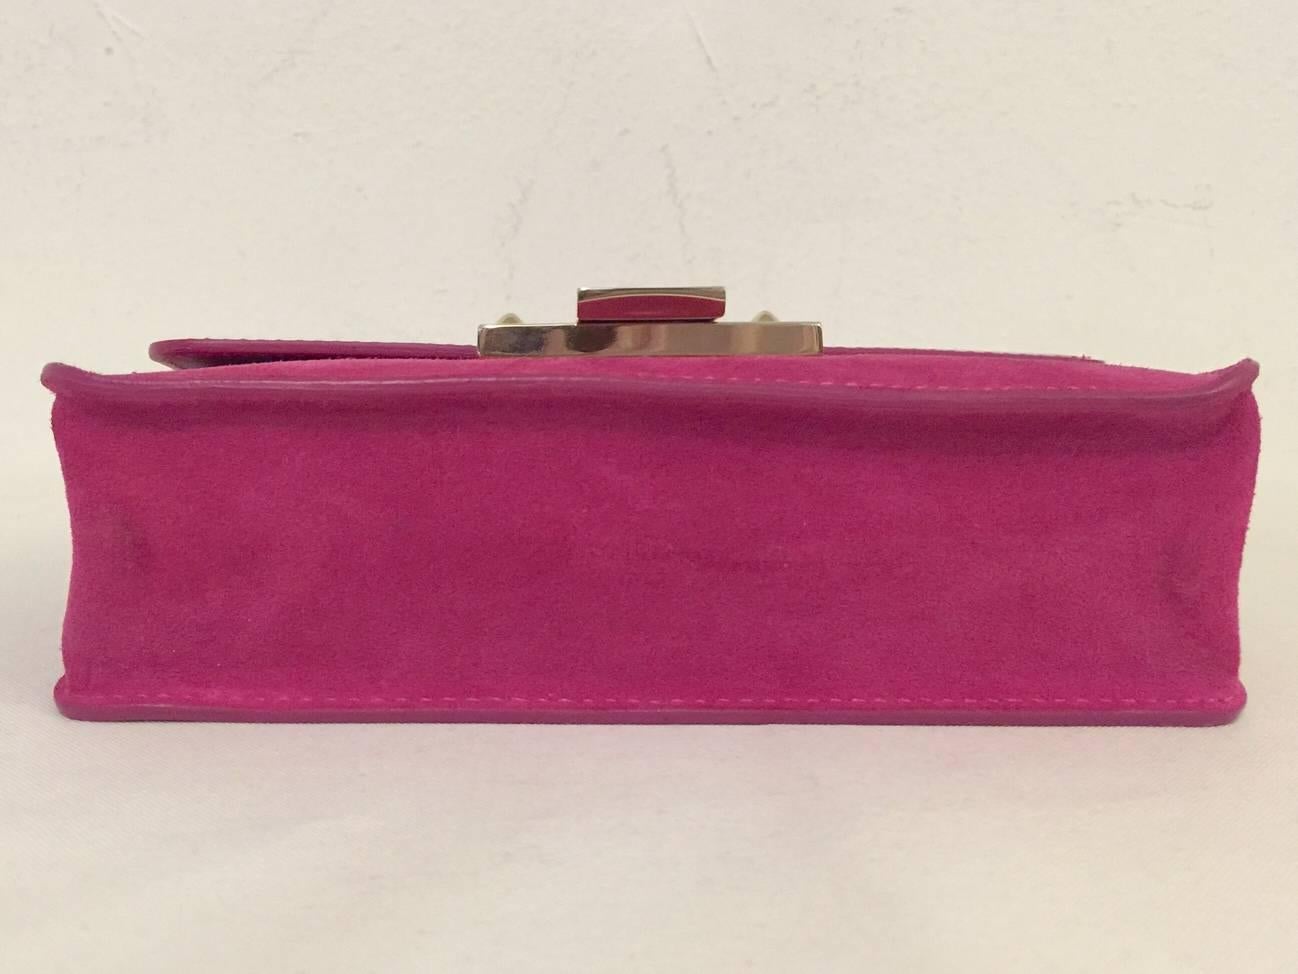 Women's Jimmy Choo Jazzberry Patent Leather and Suede Rebel Crossbody Bag